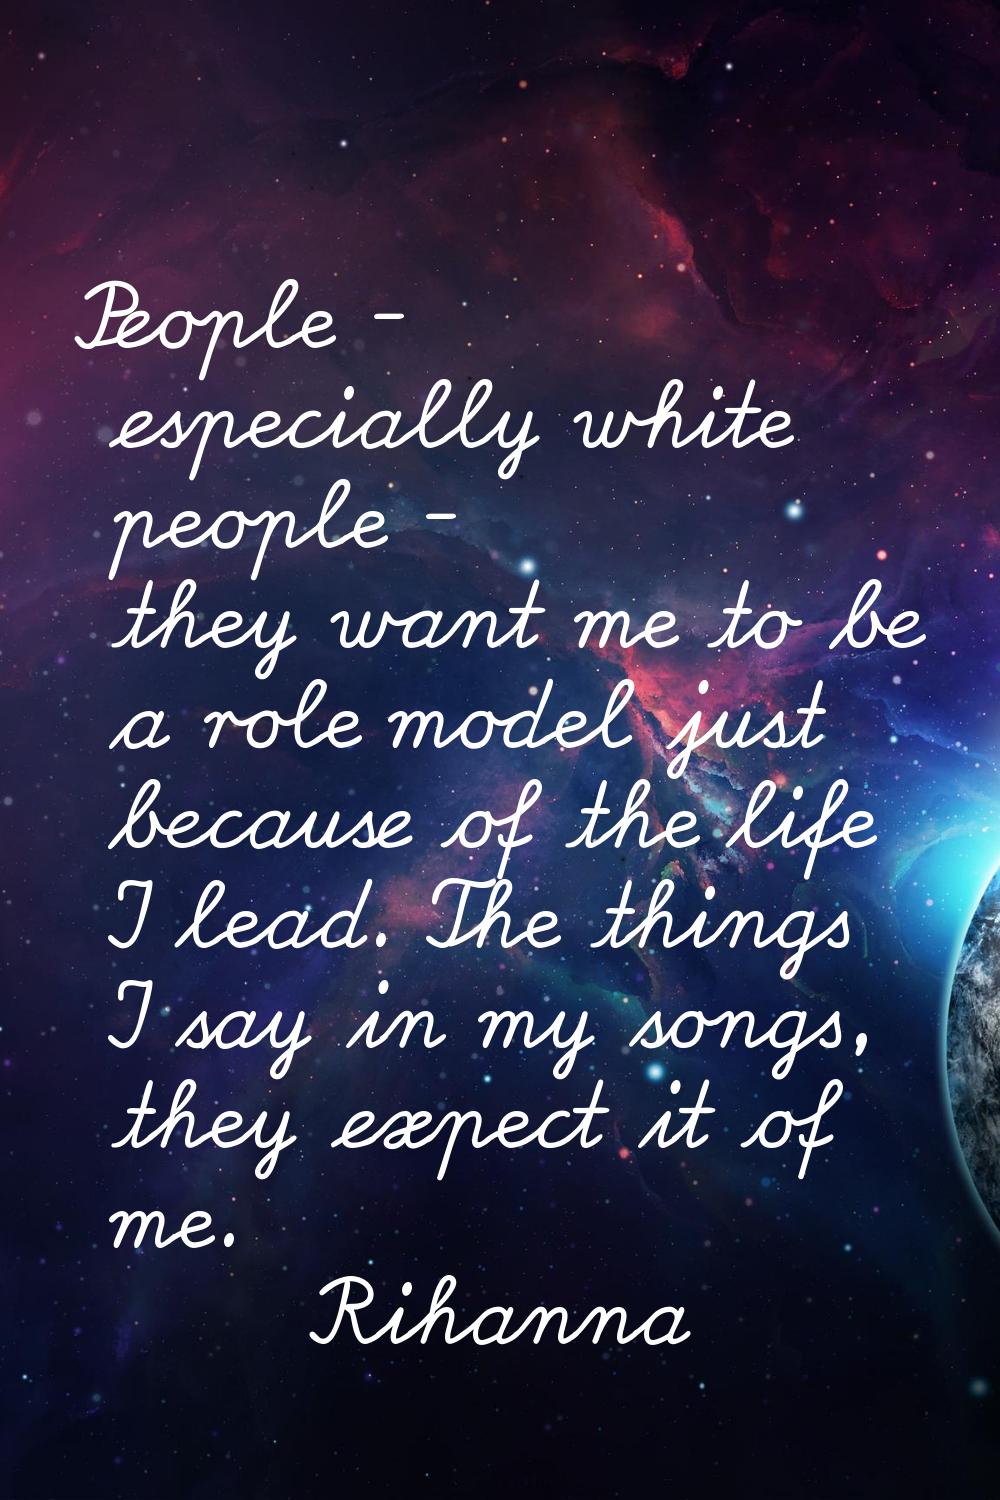 People - especially white people - they want me to be a role model just because of the life I lead.